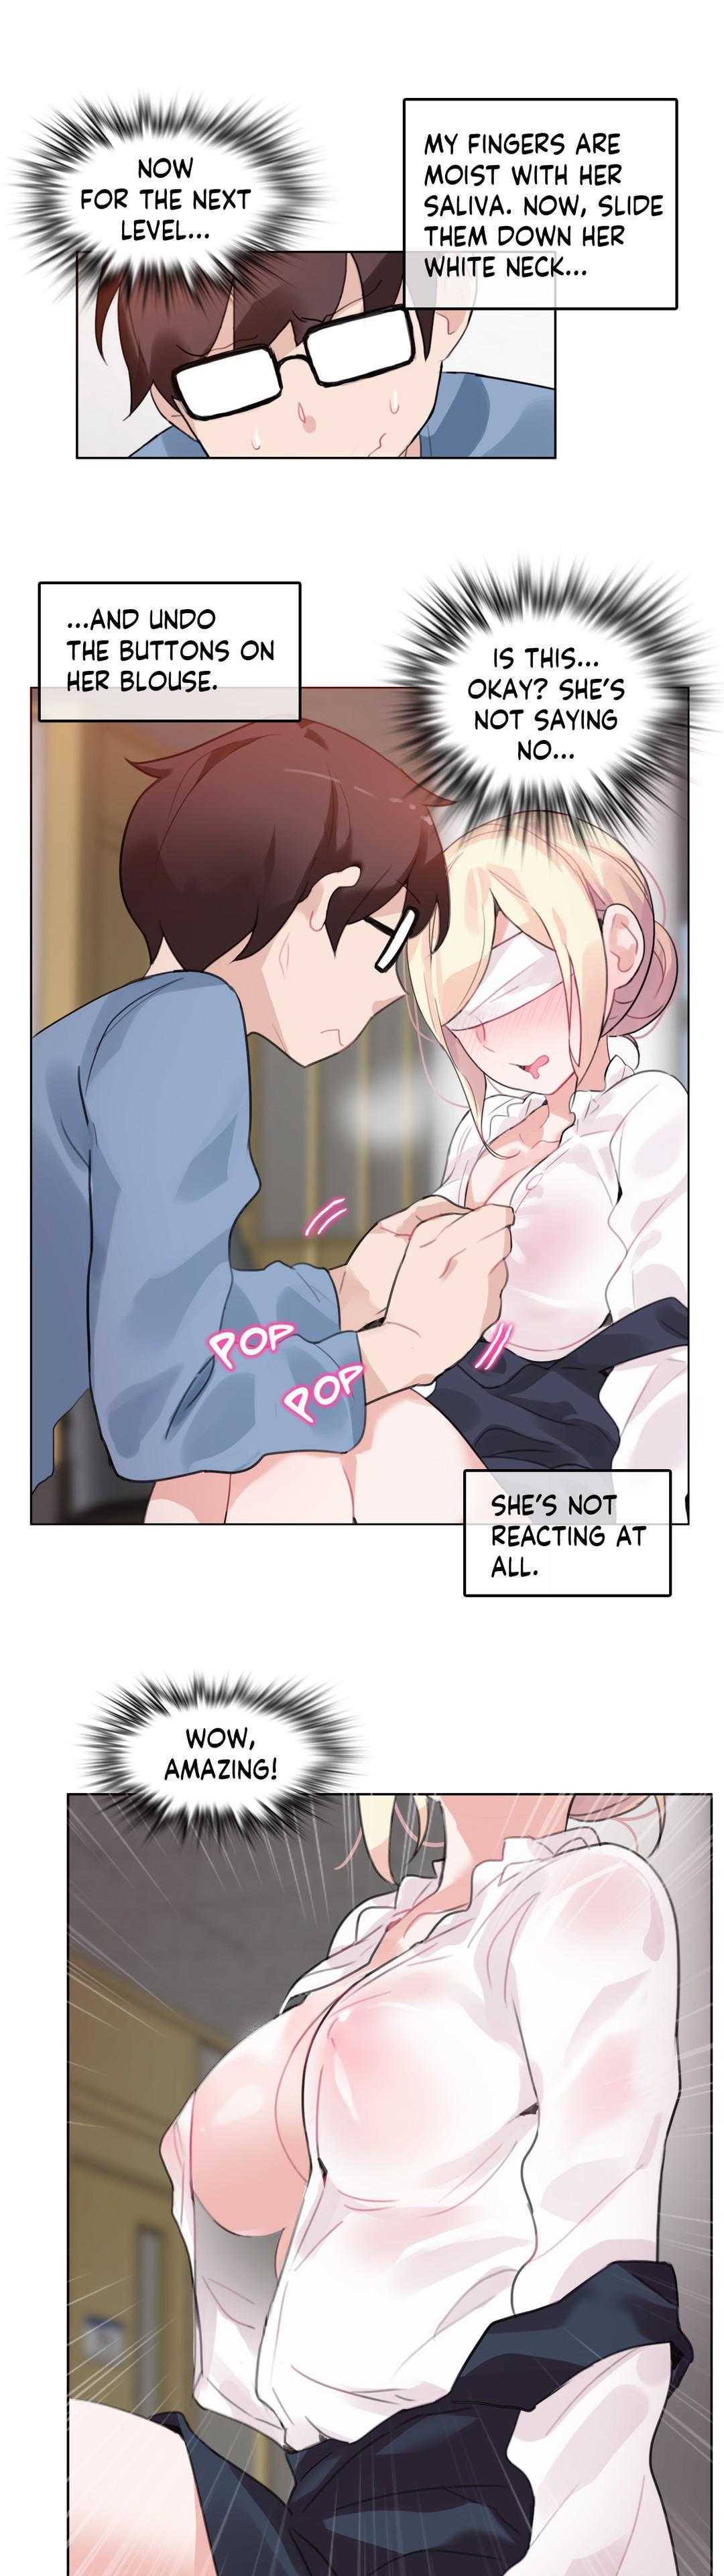 A Pervert's Daily Life Ch. 1-34 525